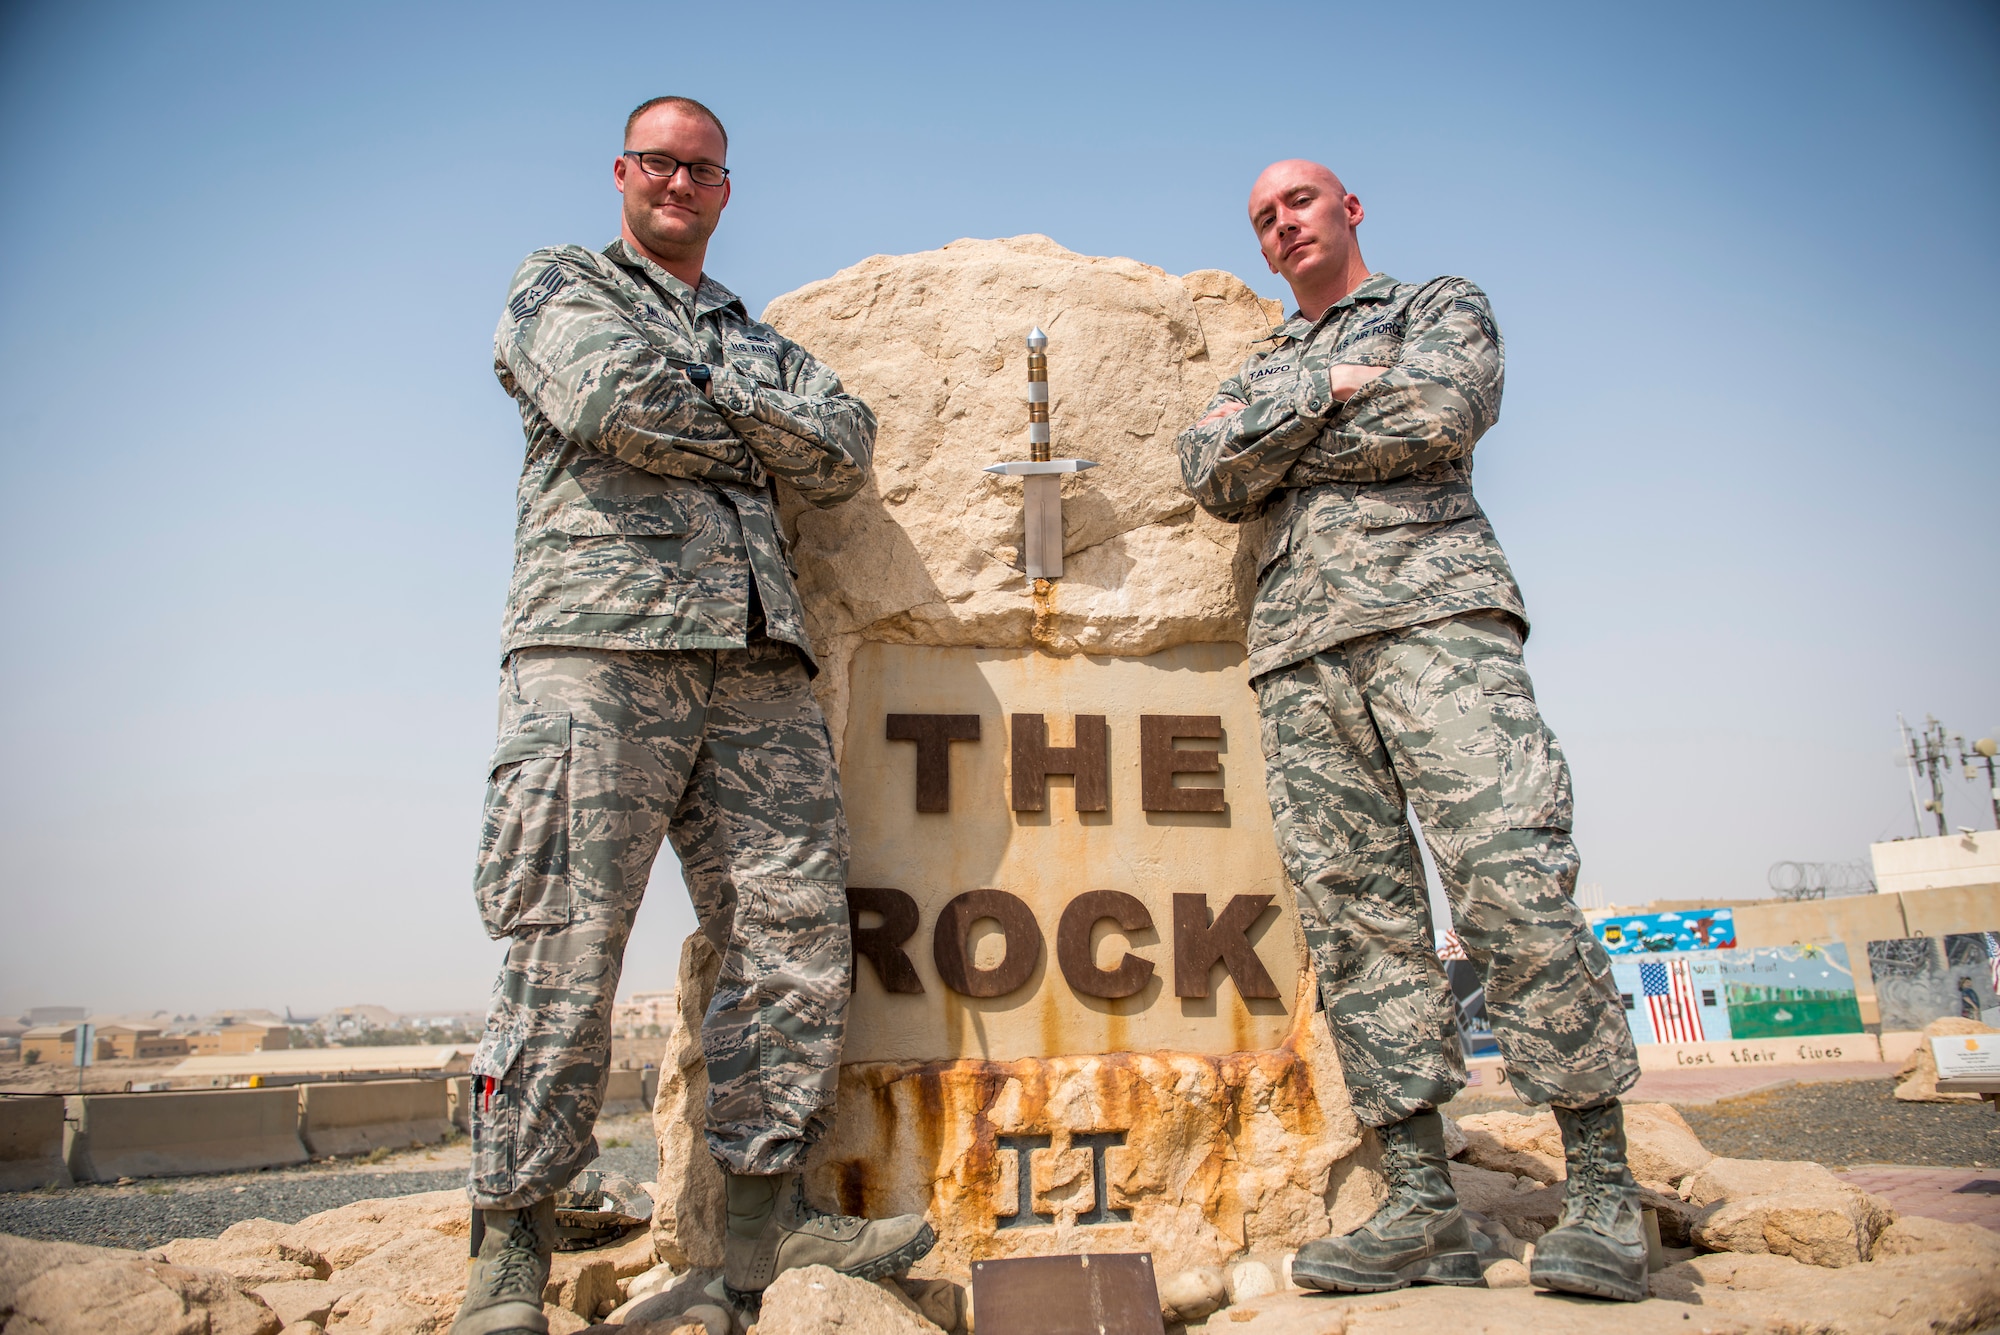 U.S. Air Force Staff Sgts. Justin Costanzo and Jarrod McMillian, 386th Expeditionary Maintenance Squadron aircraft maintenance technicians, pose in front of The Rock after unveiling the new sword to the 386th Air Expeditionary Wing Aug. 19, 2014 at an undisclosed location in Southwest Asia. The two spent over 140 man-hours designing and building the sword. Costanzo deployed from Shaw Air Force Base, S.C. and McMillian deployed from Davis-Monthan AFB, Ariz. in support of Operation Enduring Freedom. (U.S. Air Force photo by Staff Sgt. Jeremy Bowcock)